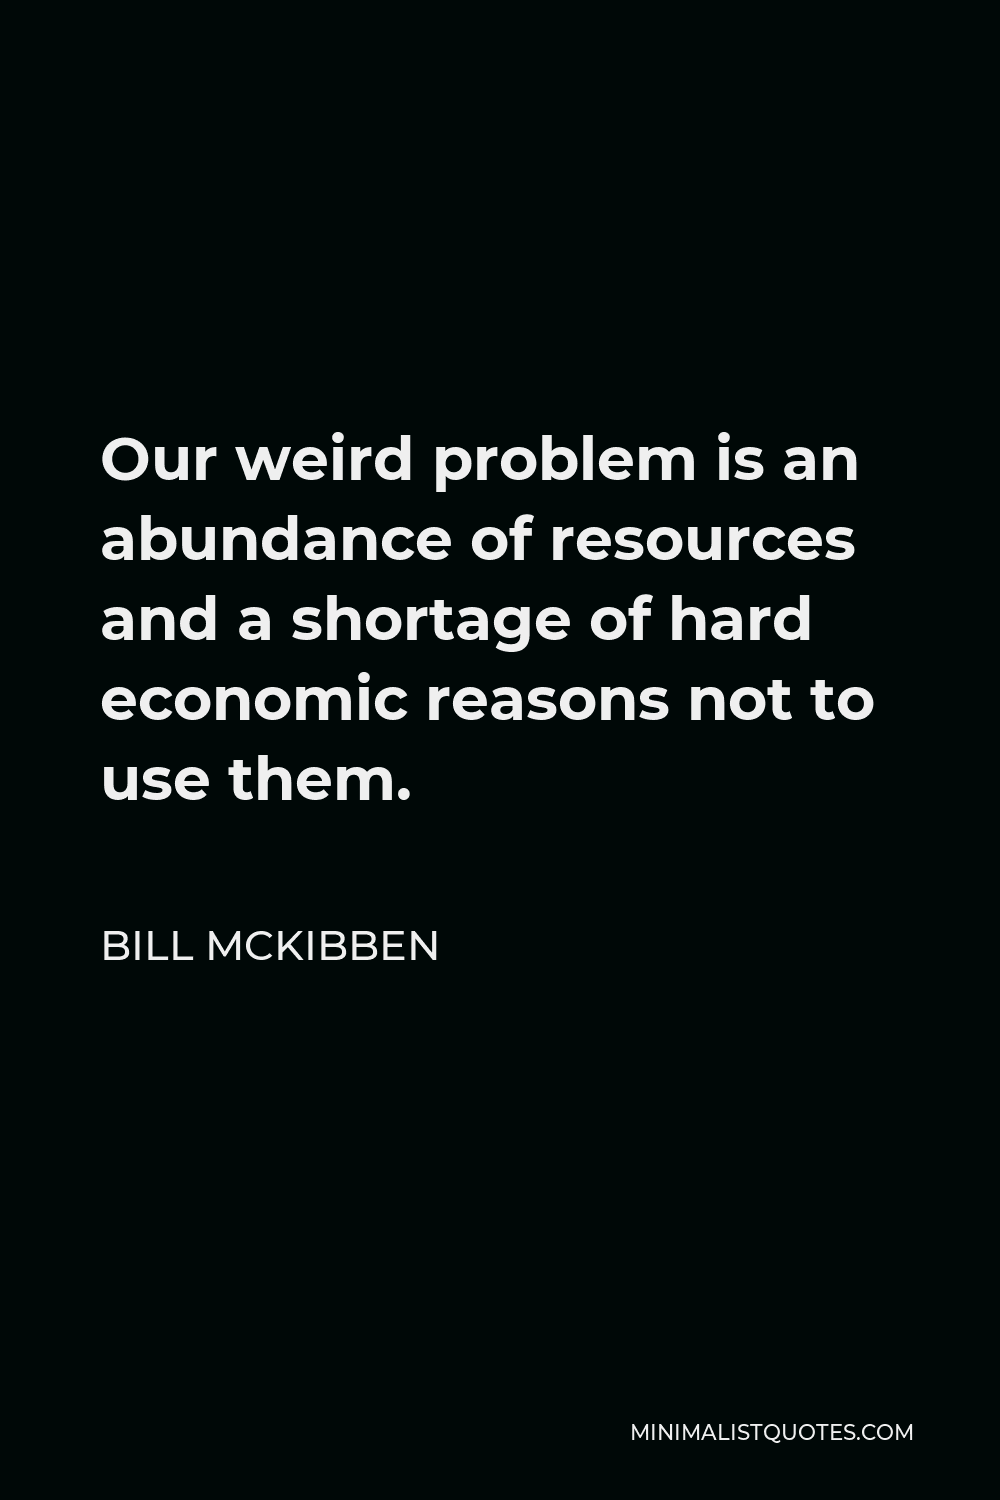 Bill McKibben Quote - Our weird problem is an abundance of resources and a shortage of hard economic reasons not to use them.